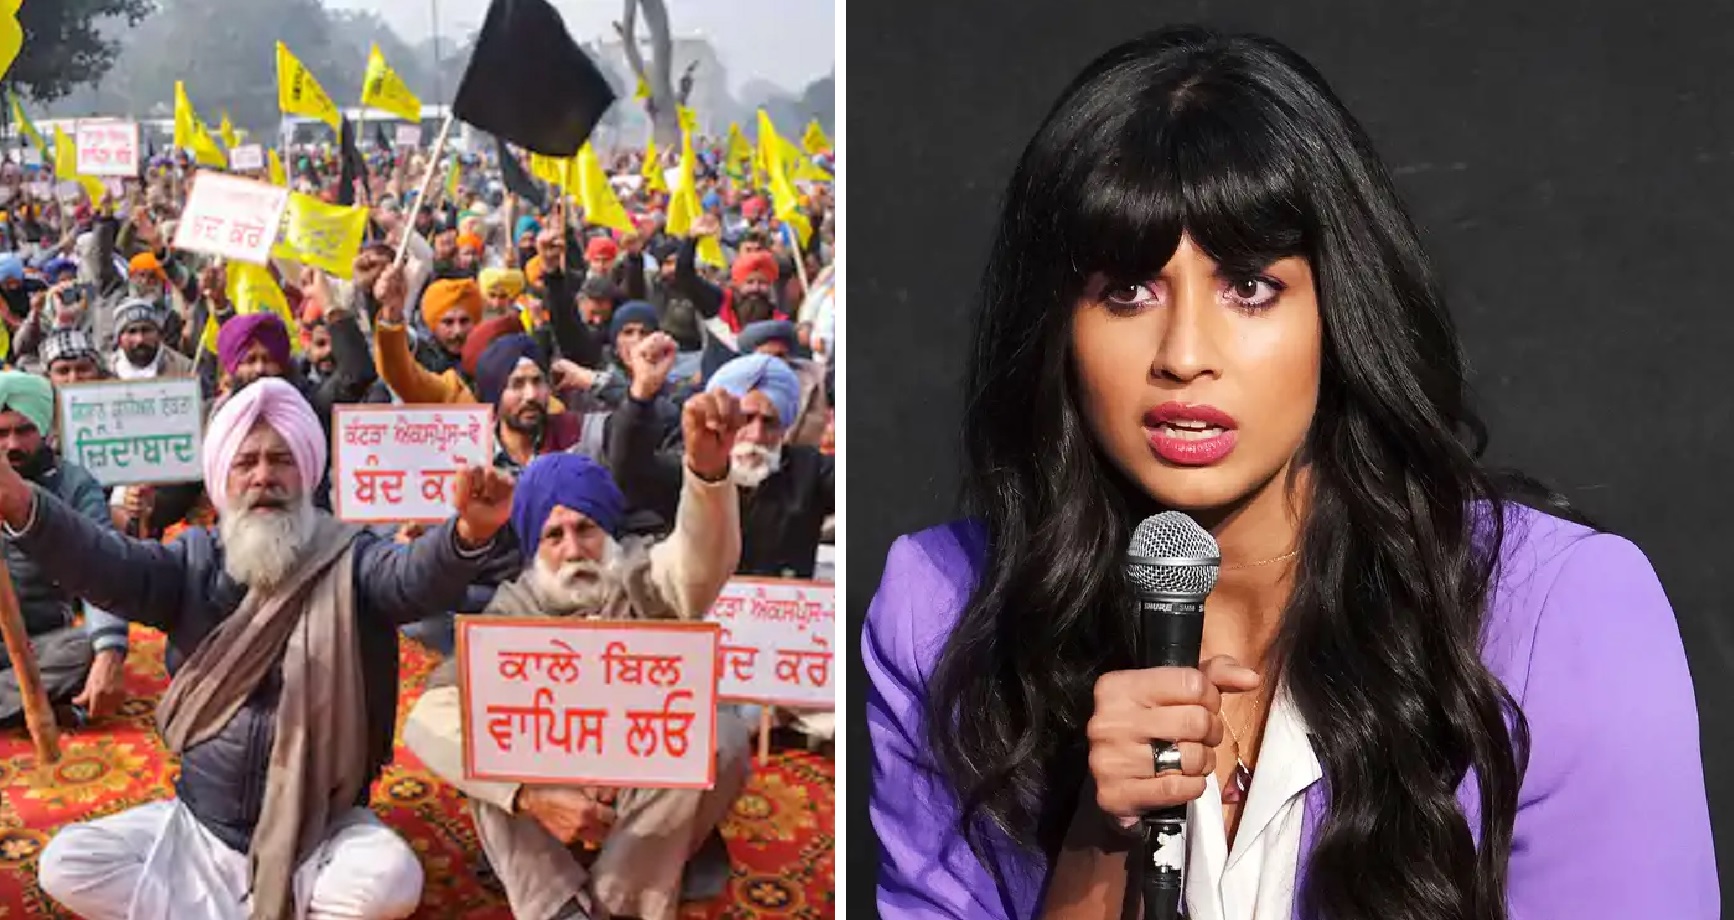 British Actress Jameela Jamil Says She’s ‘Getting Rape Threats, For Supporting Farmers Protest’